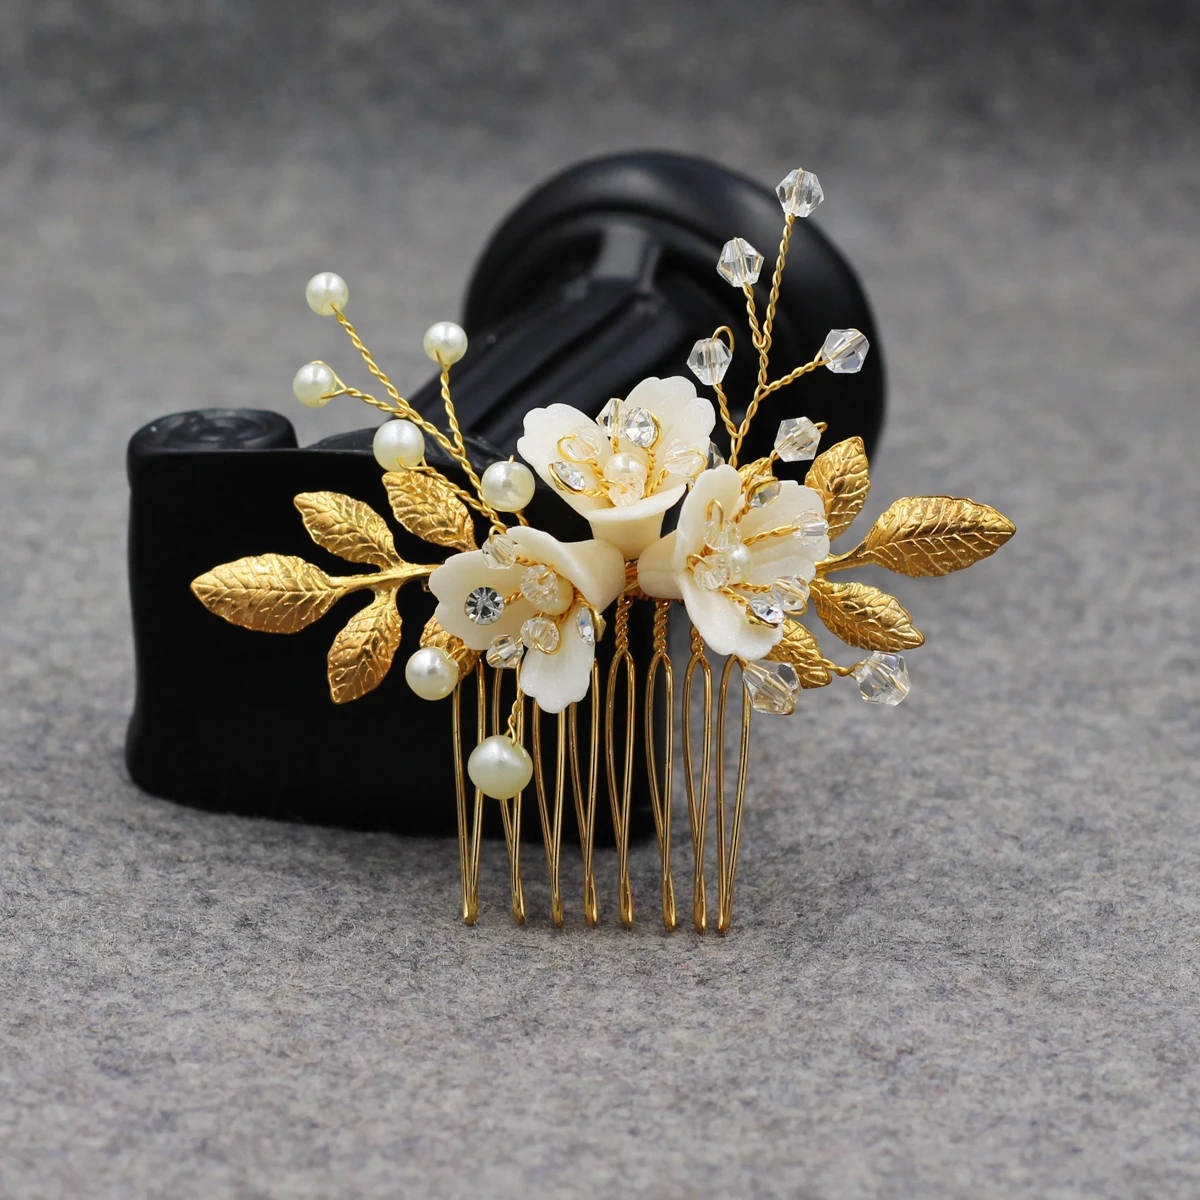 

HP097 Exquisite Wedding Bridal Handmade Hair Comb Ceramics Pearl Crystal Flower Alloy Leaves Brides Bridesmaid Pageant Headpiece